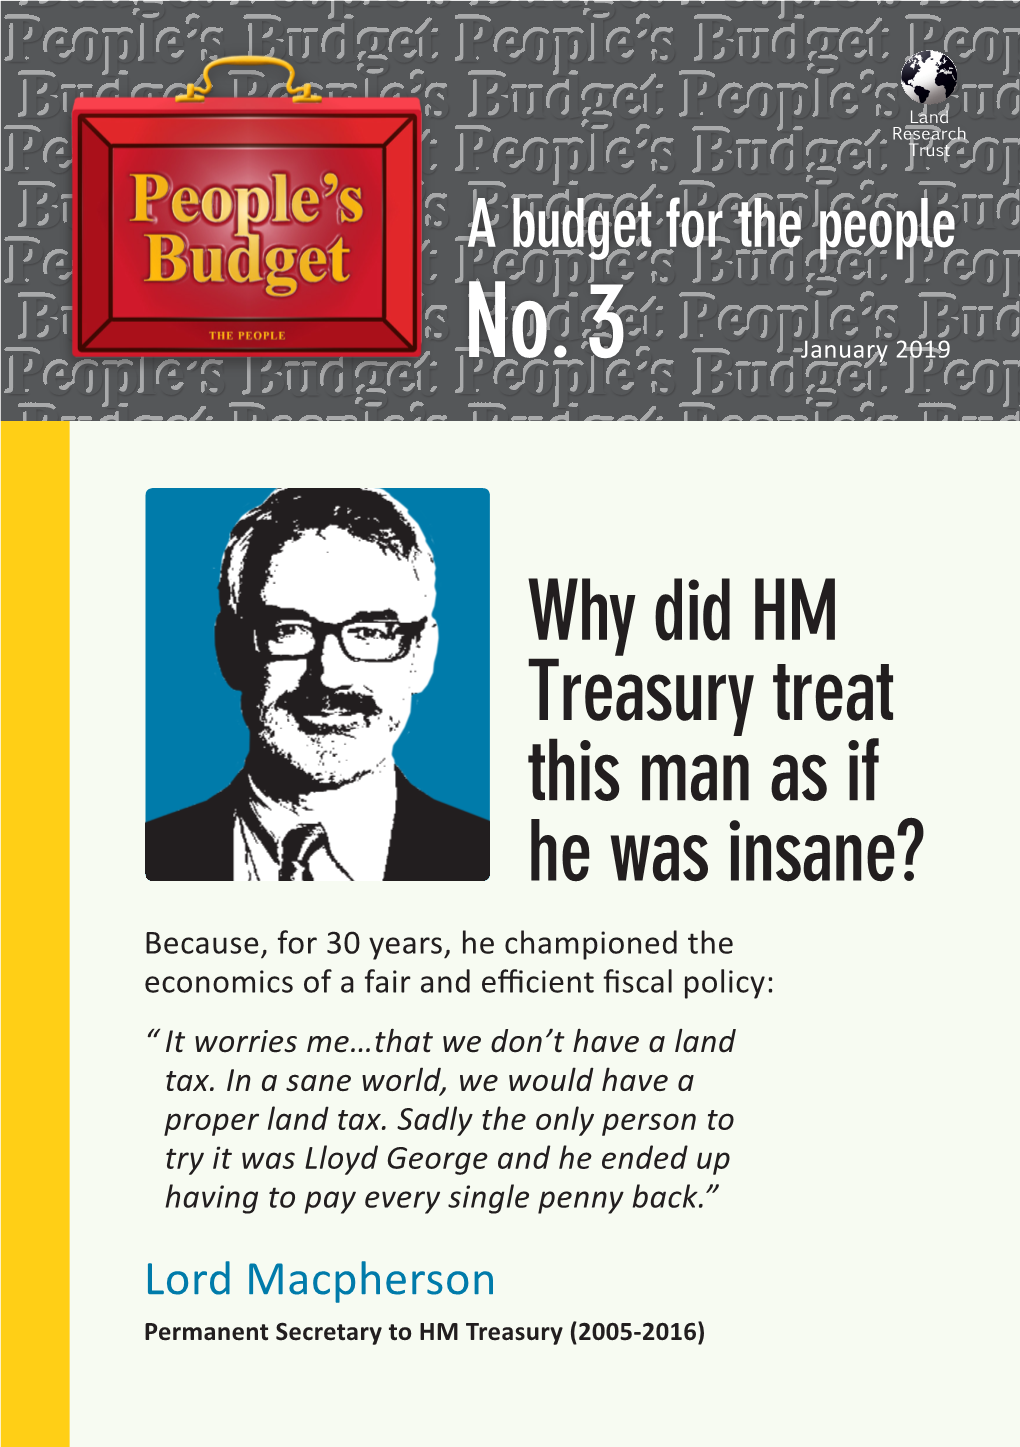 Why Did HM Treasury Treat This Man As If He Was Insane?